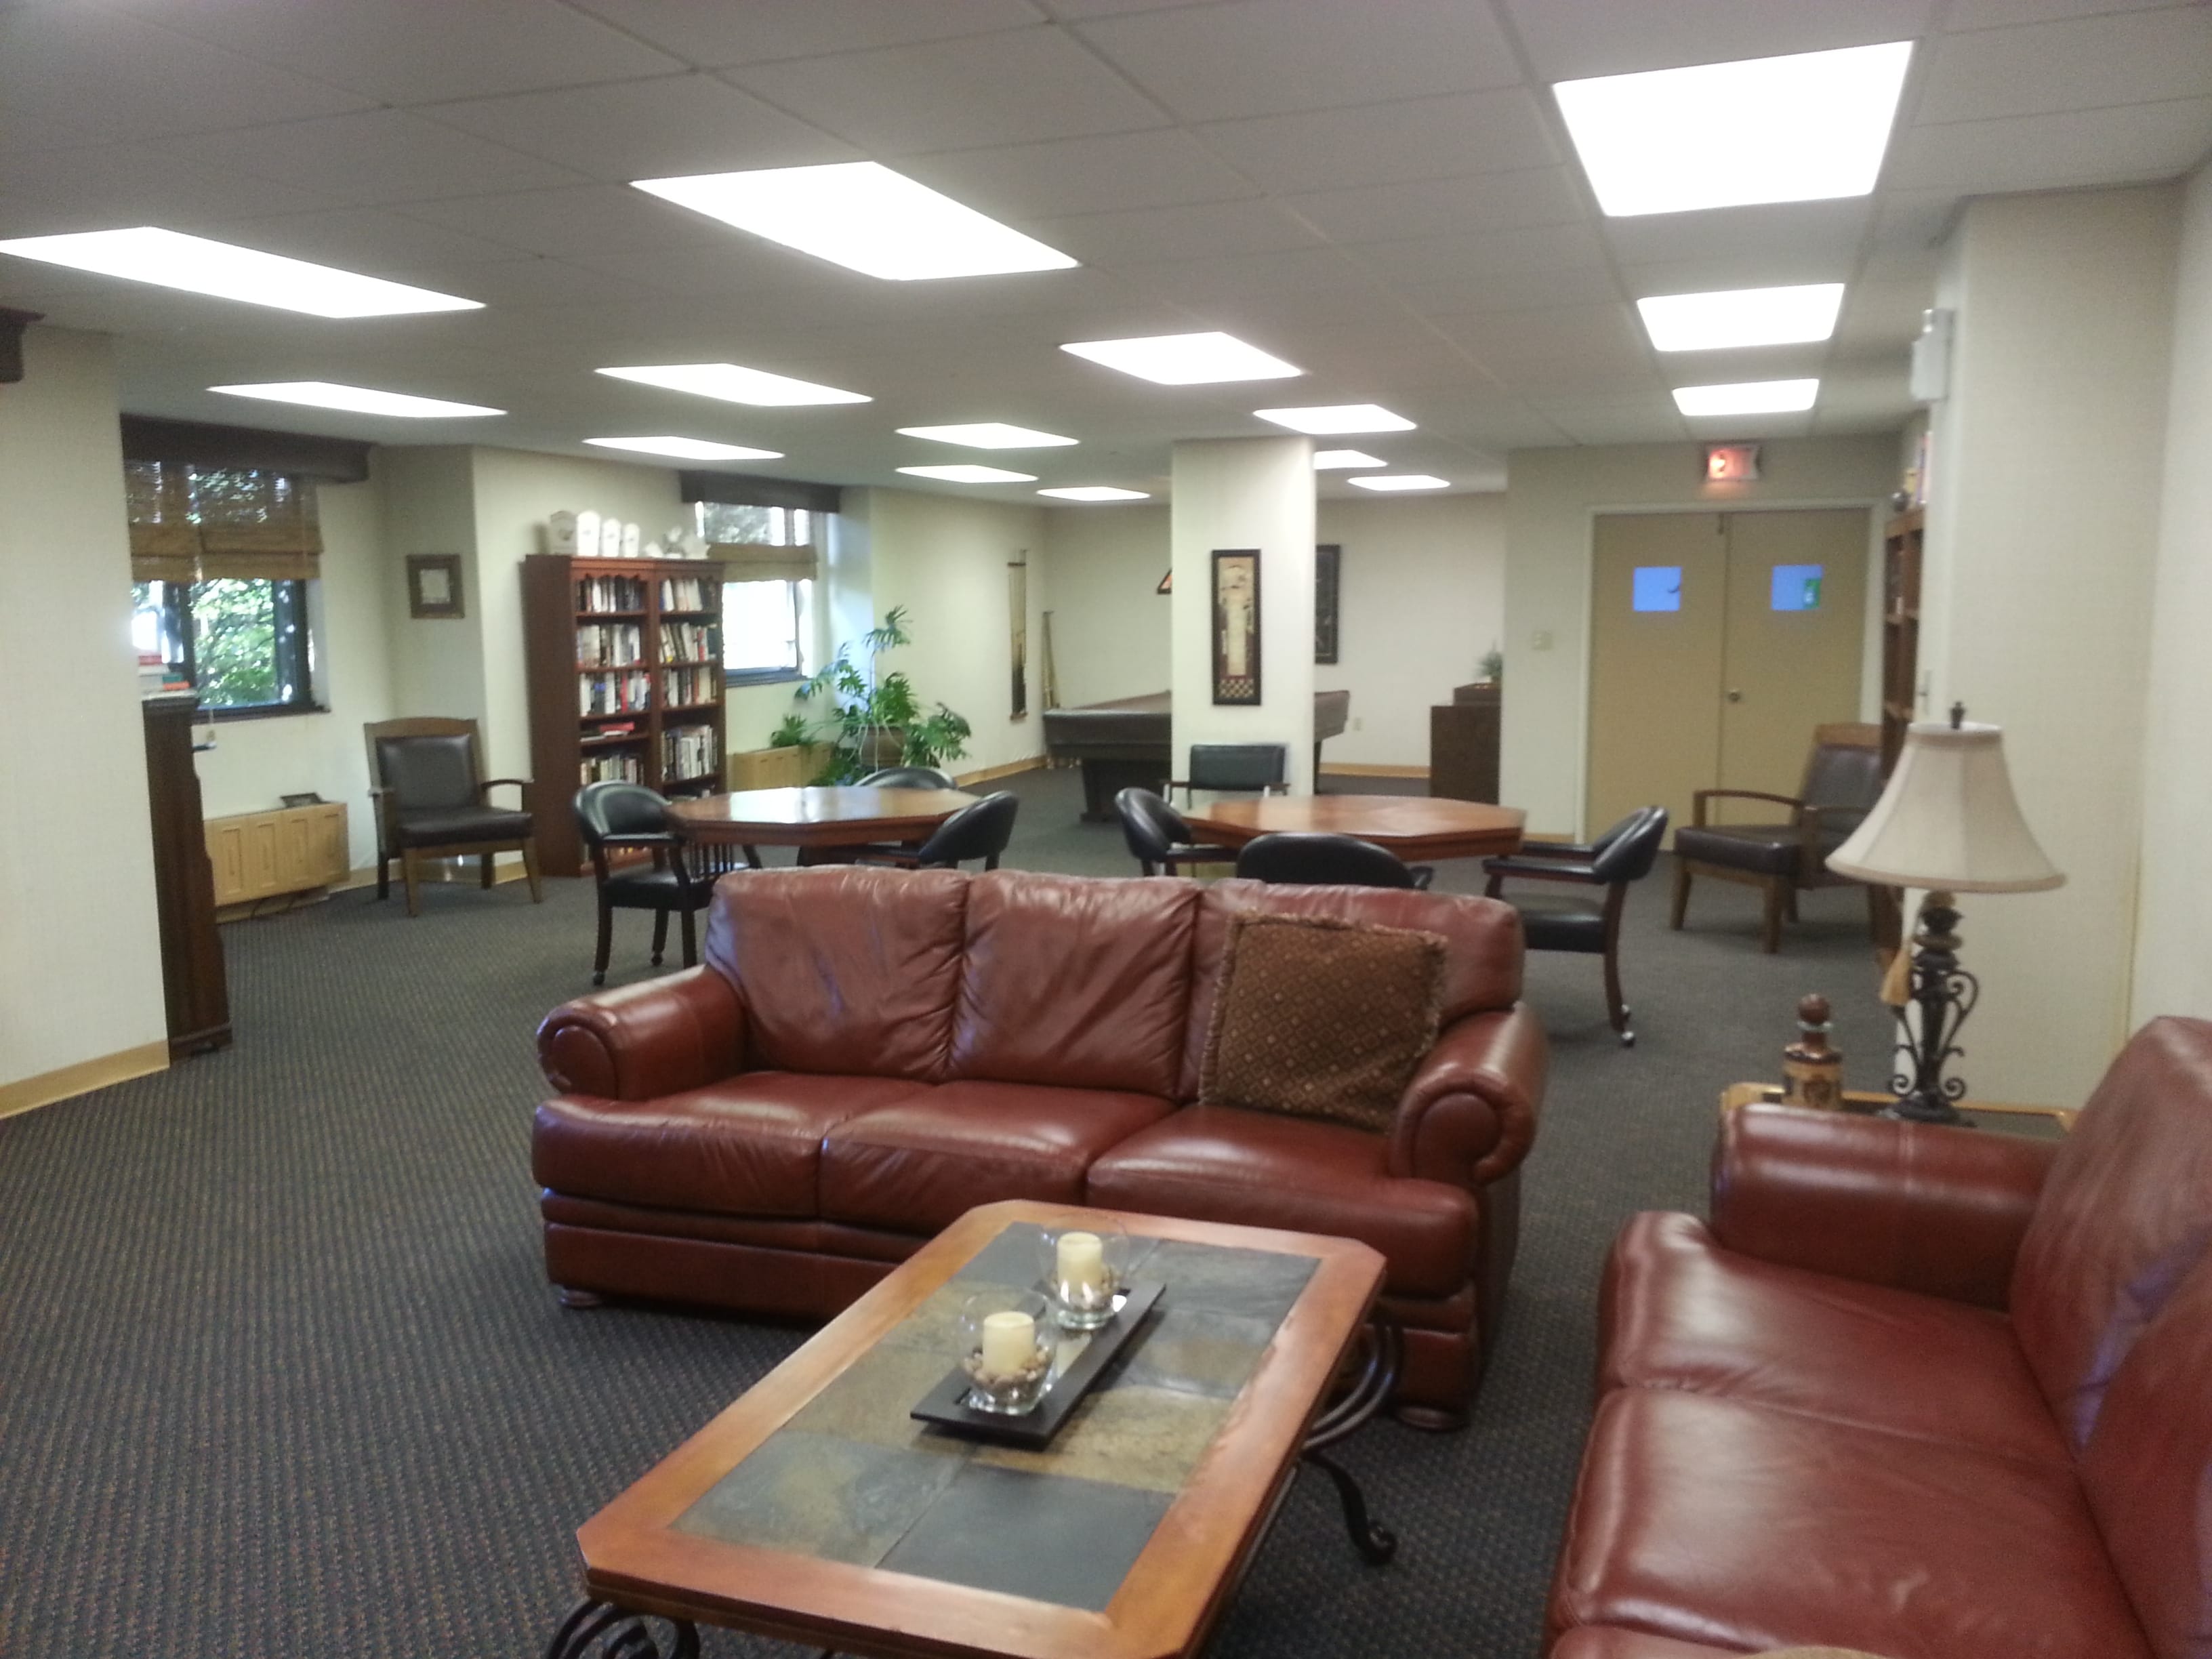 On the entry level of Eastpointe is this community room.